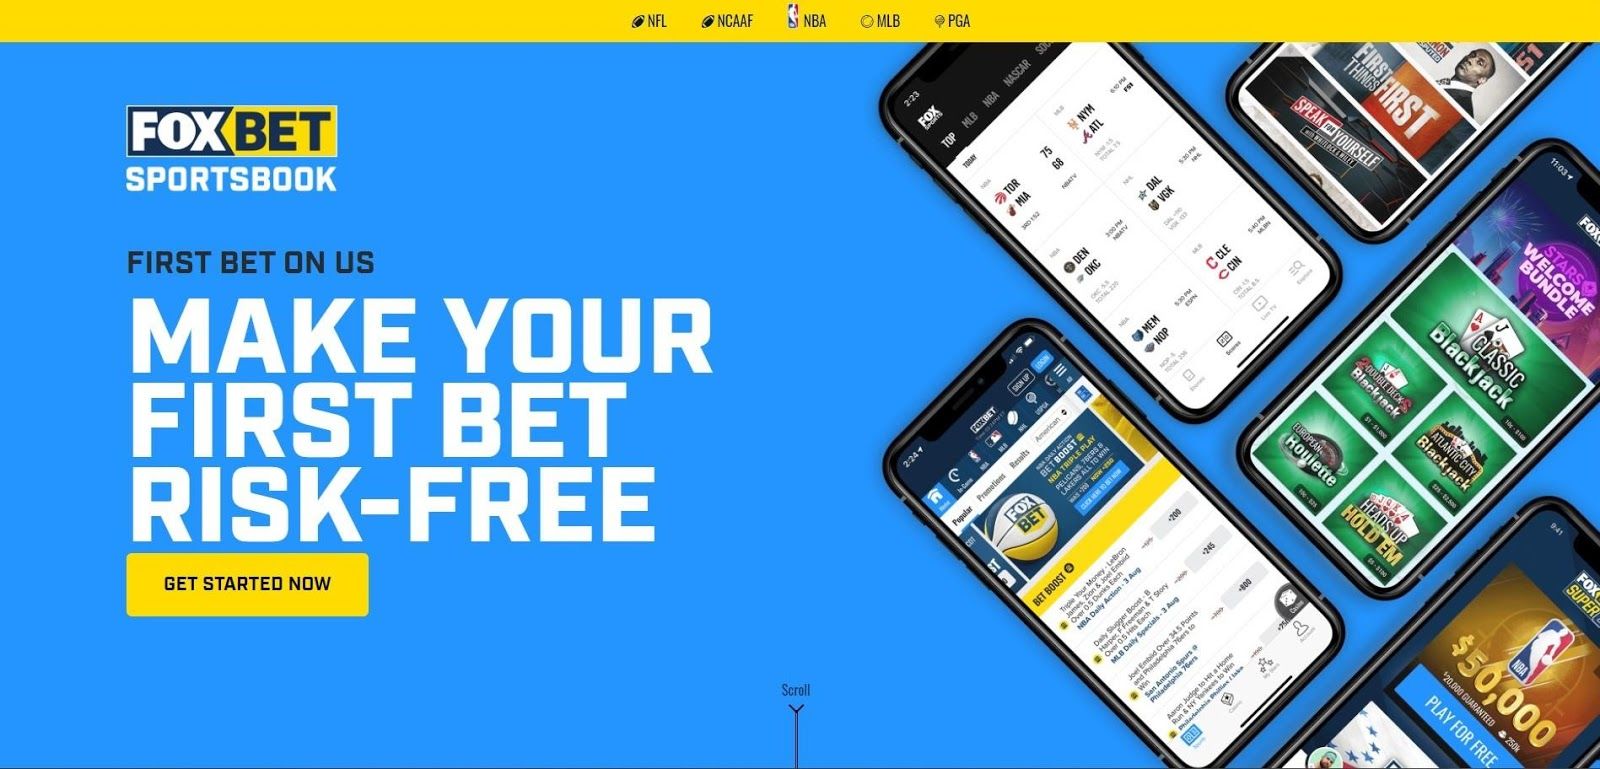 “Get Started” Call to Action button on Fox Bet sportsbook landing page